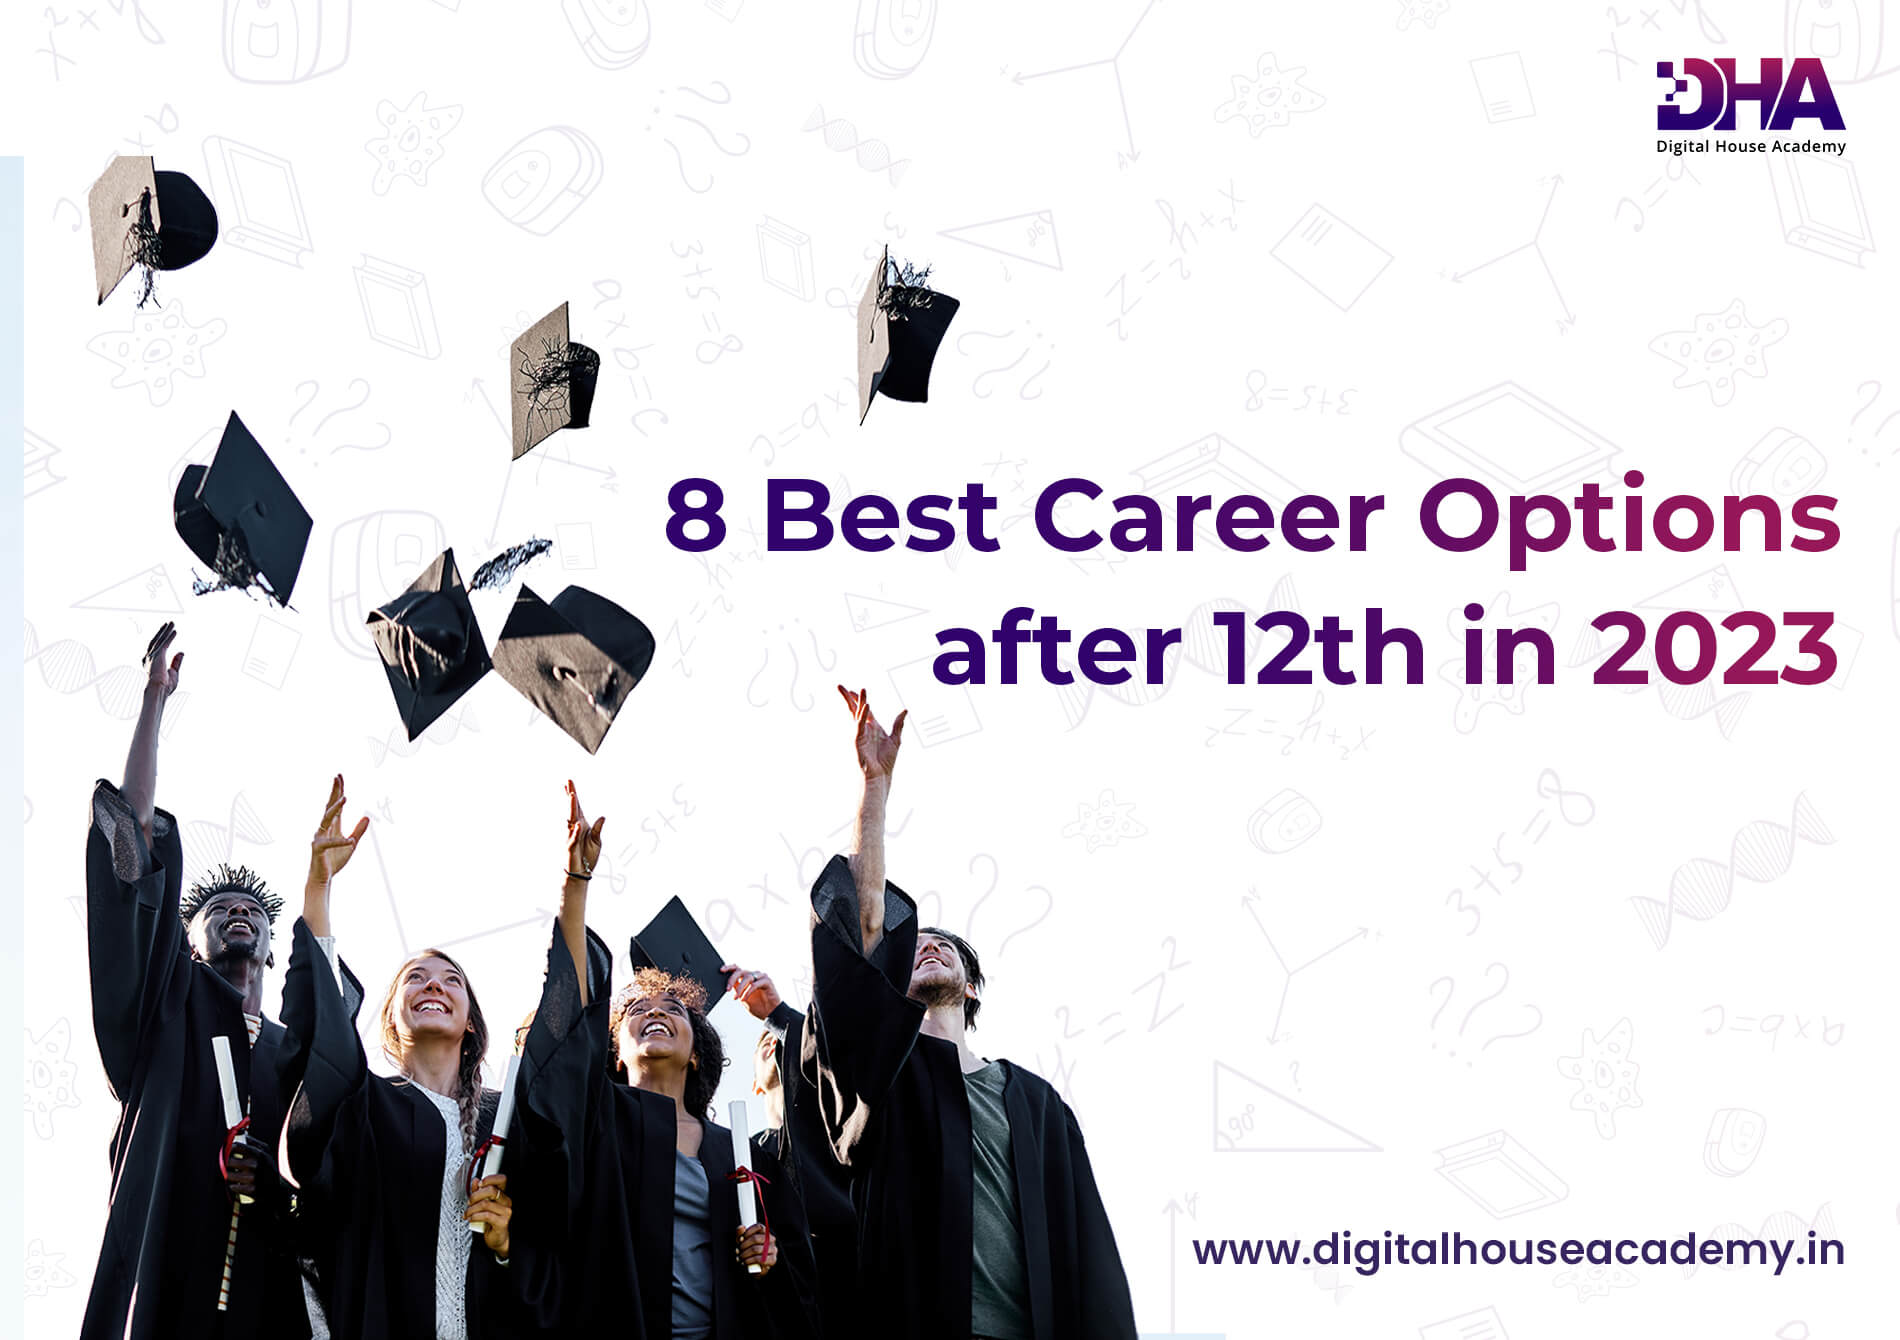 8 Best Career Options after 12th in 2023